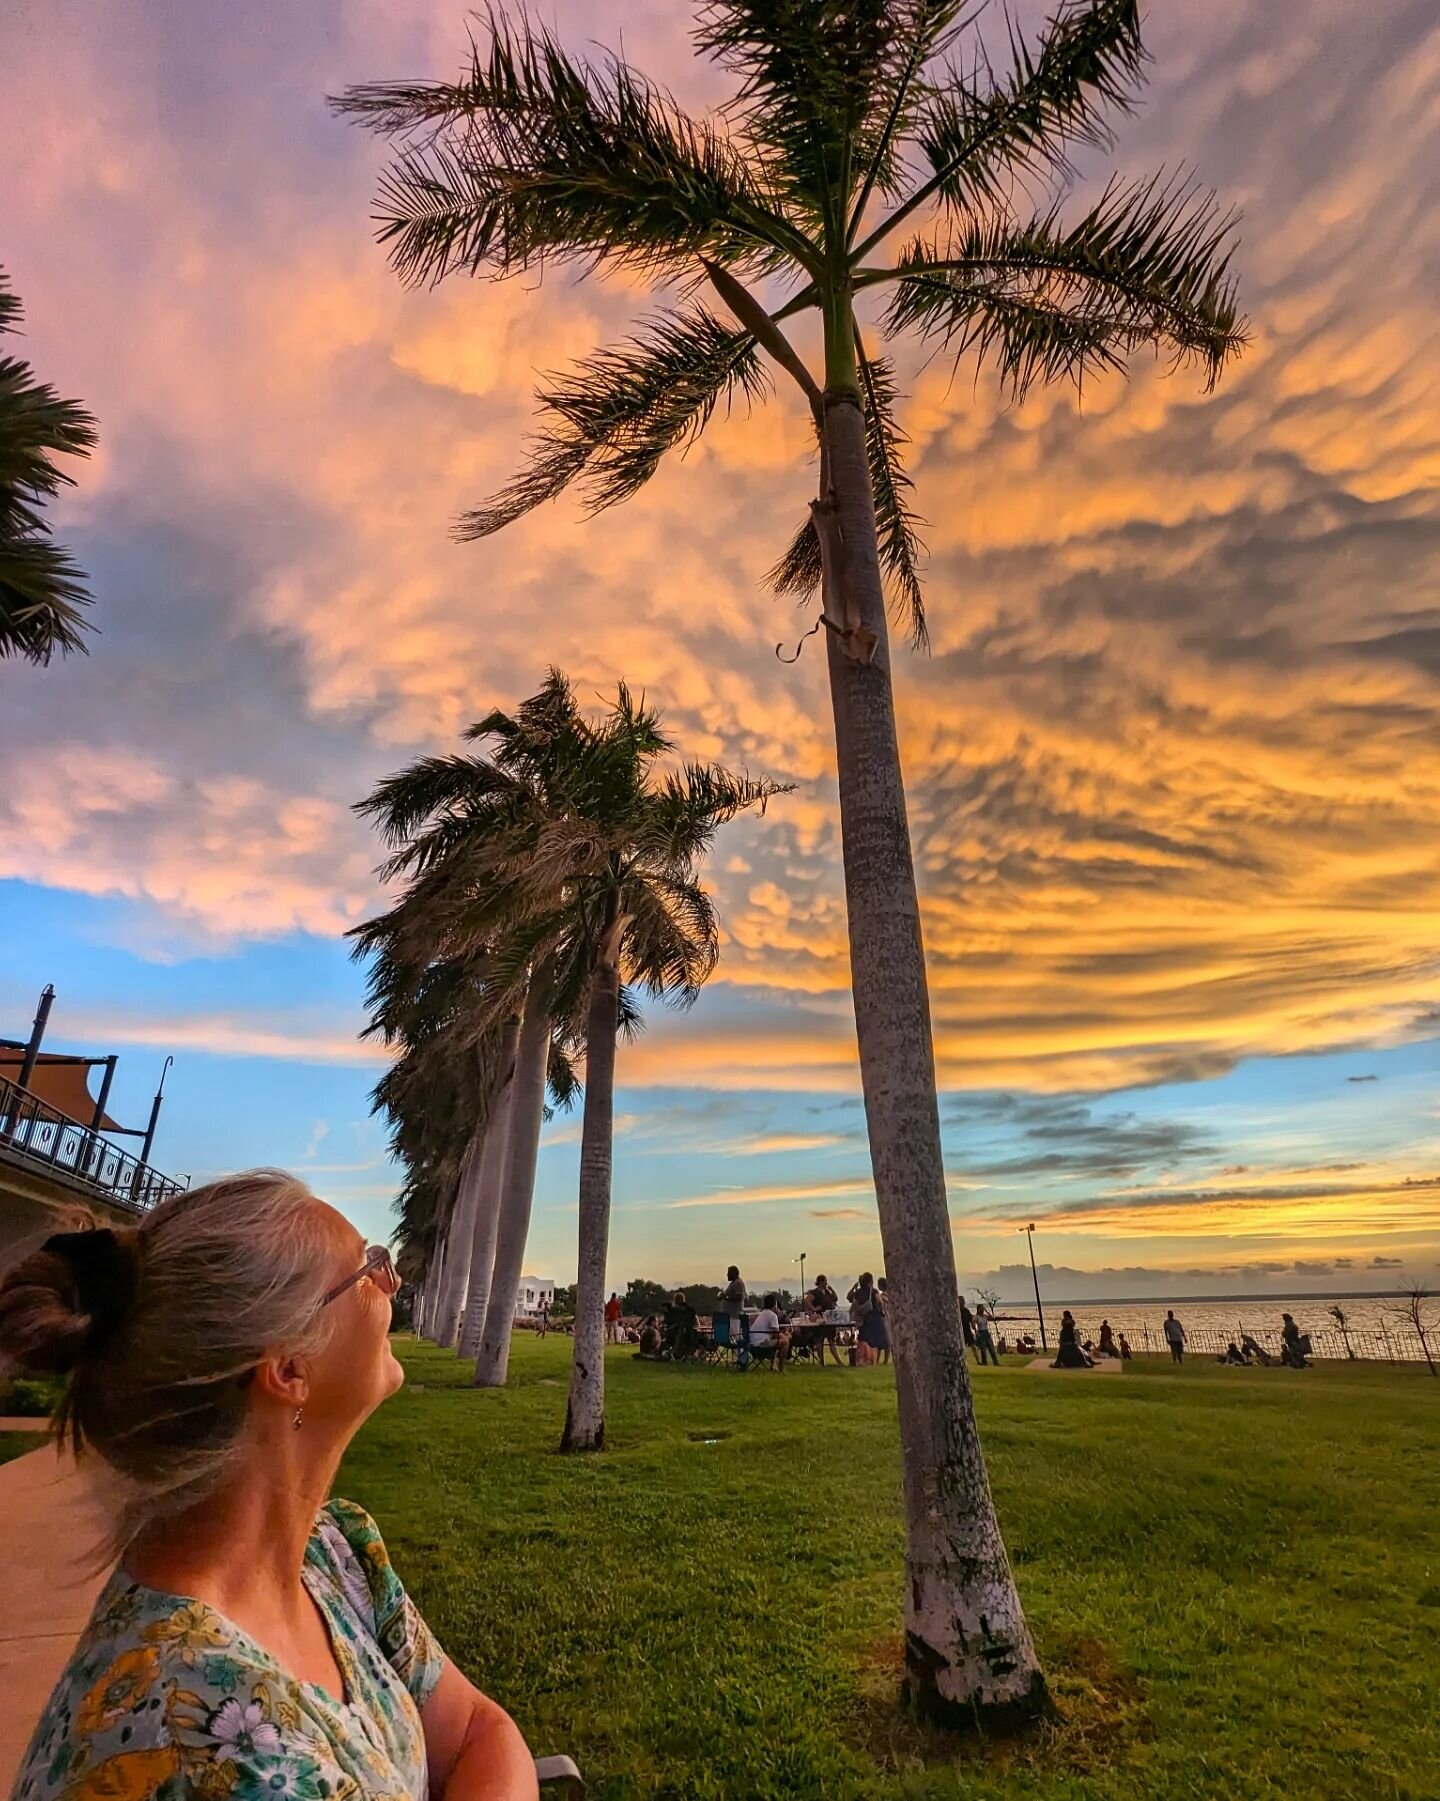 Watched this stunning sunset down at Cullen Bay tonight with my mum @maggiemccl. 
Anyone know what these interesting clouds are?

#sunset #Darwin #darwinaustralia #cullenbay